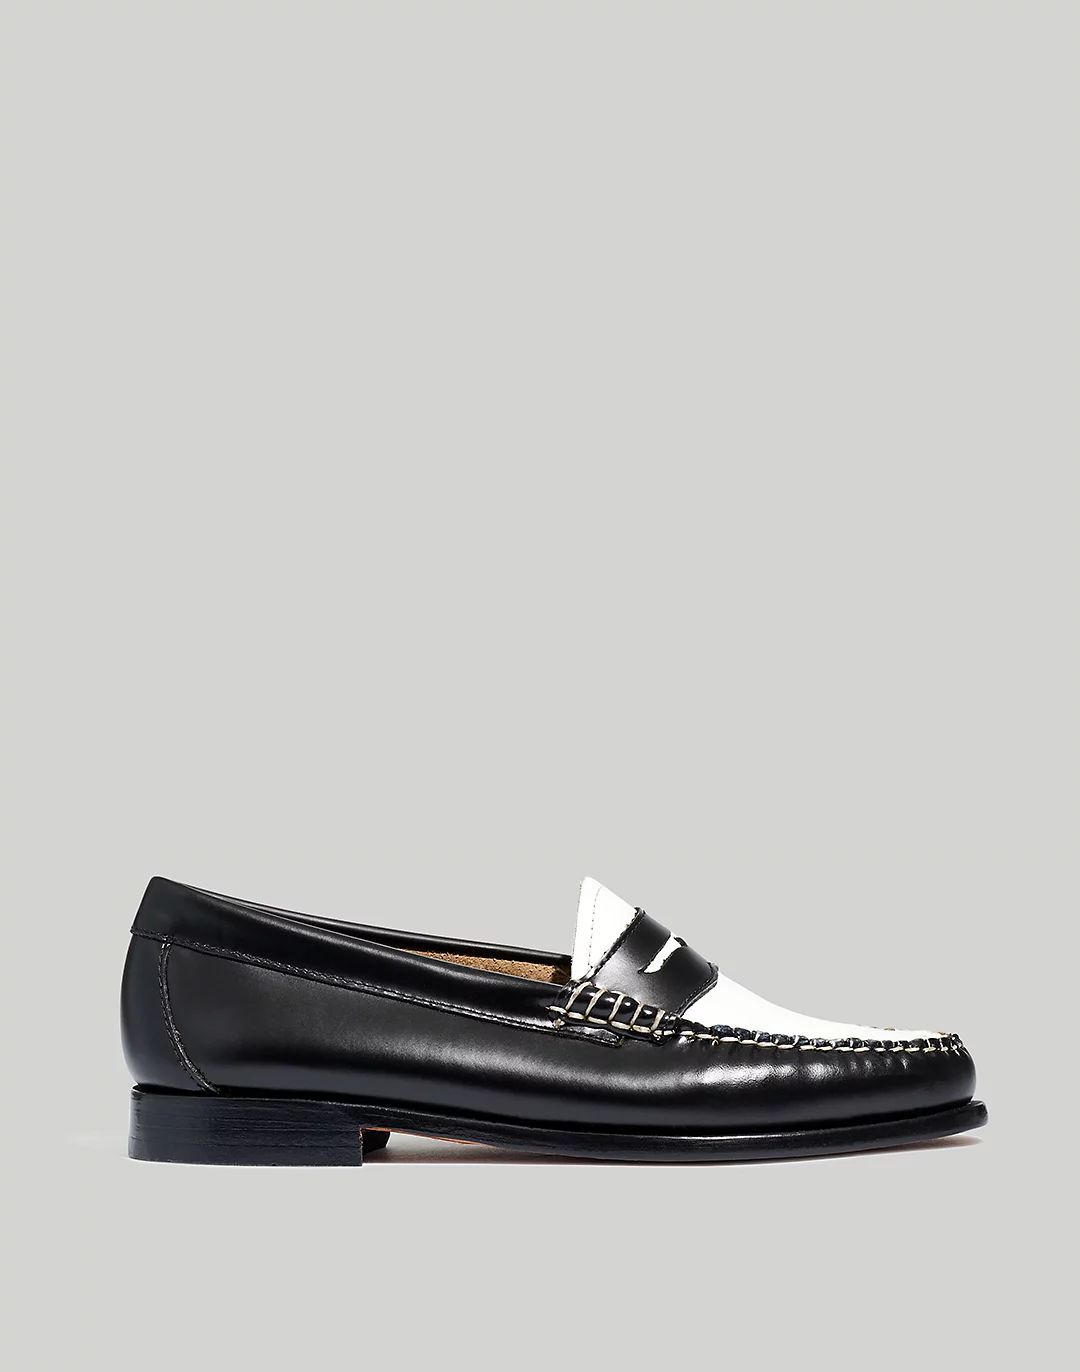 G.H. Bass® Whitney Weejuns® Penny Loafers | Madewell